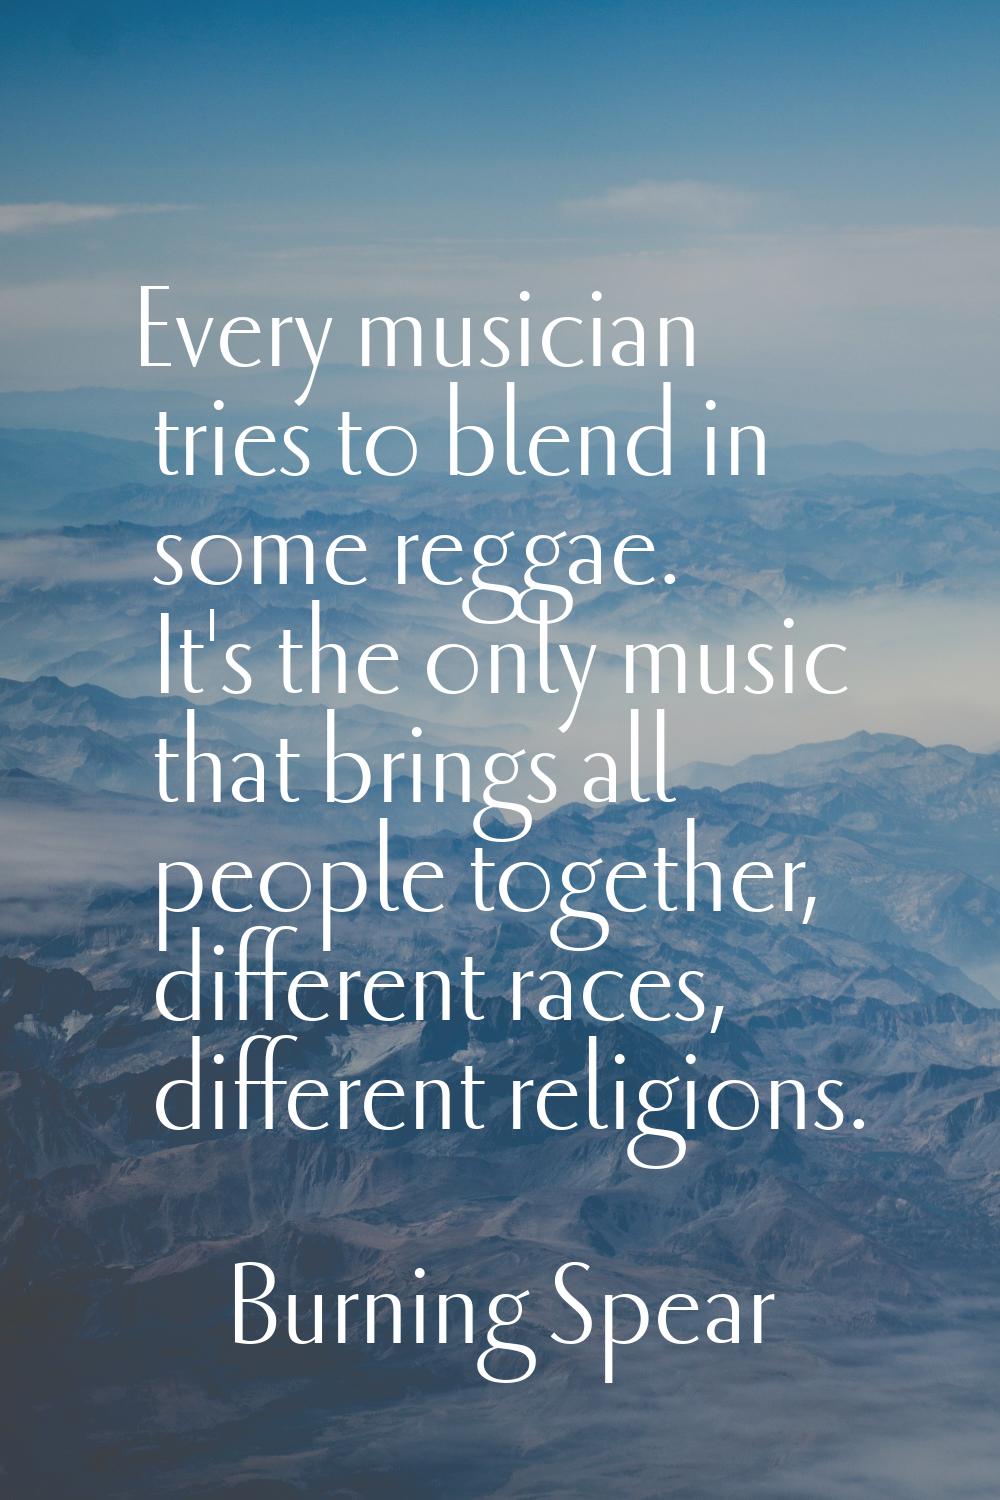 Every musician tries to blend in some reggae. It's the only music that brings all people together, 